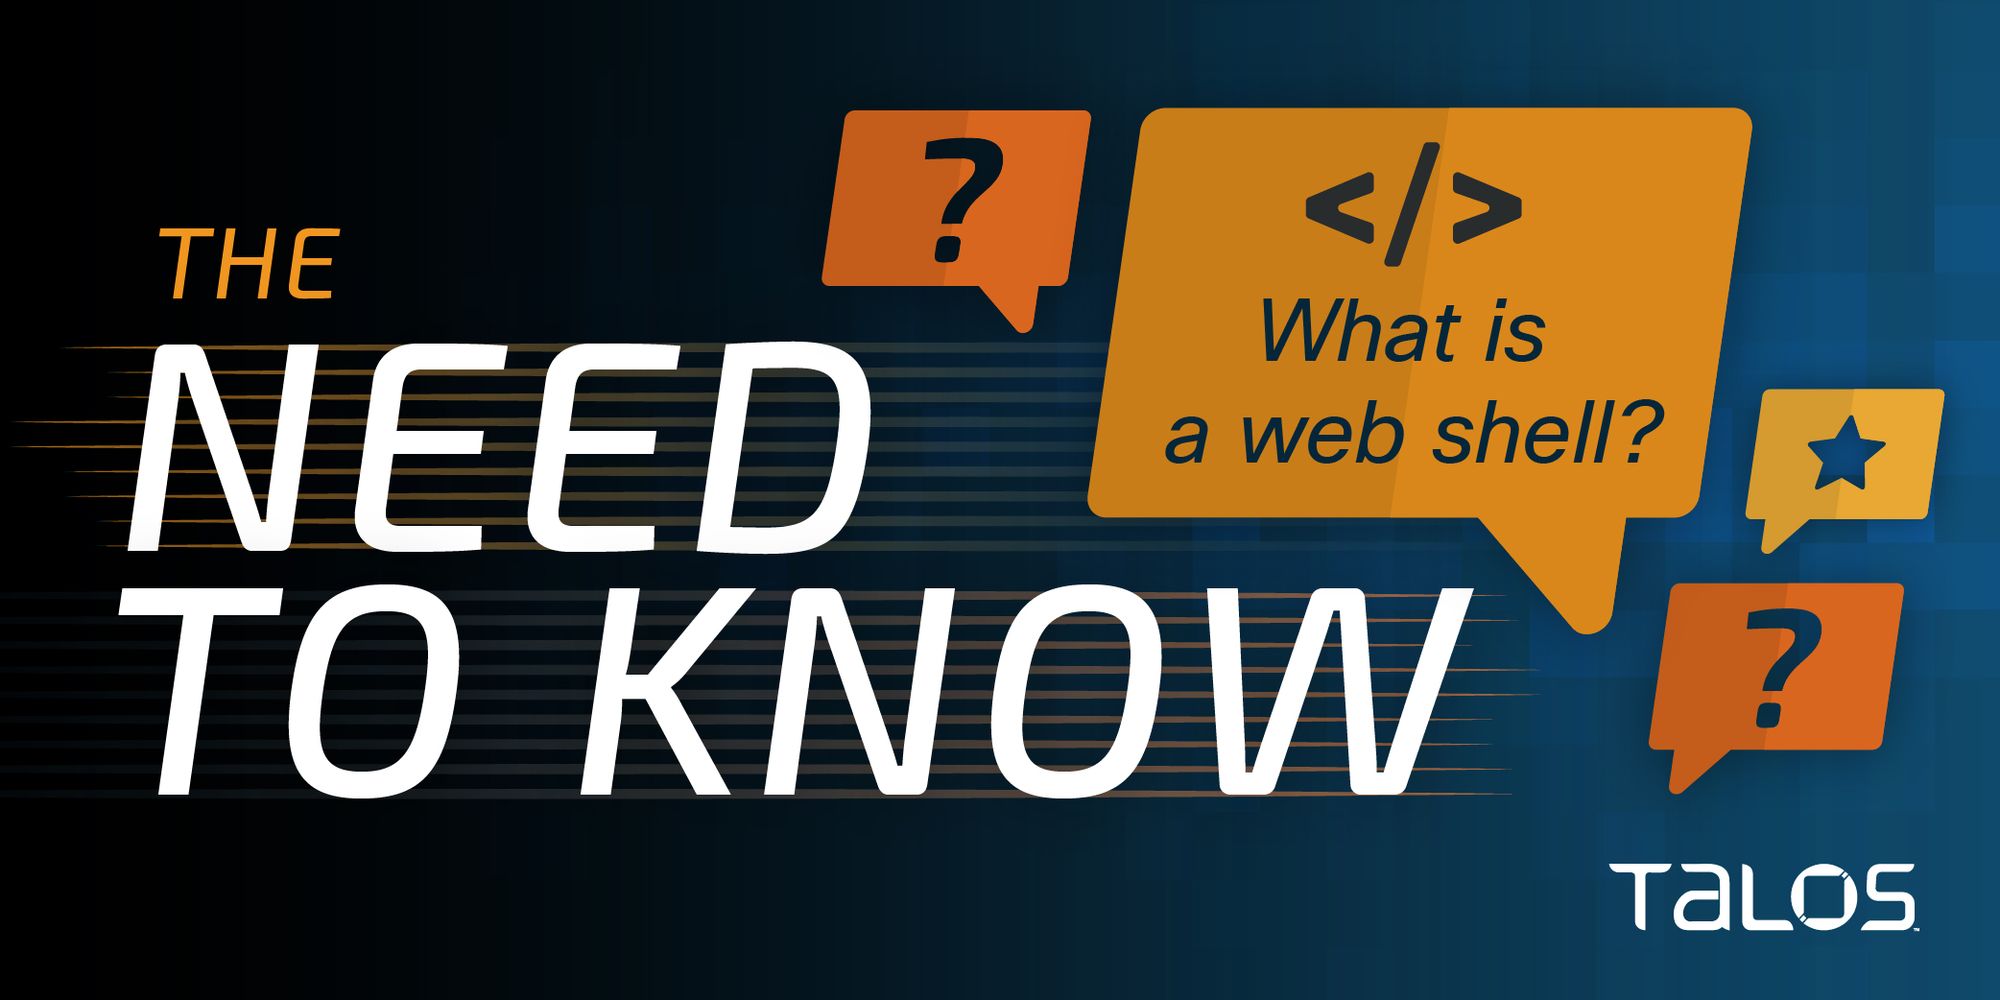 What is a web shell?